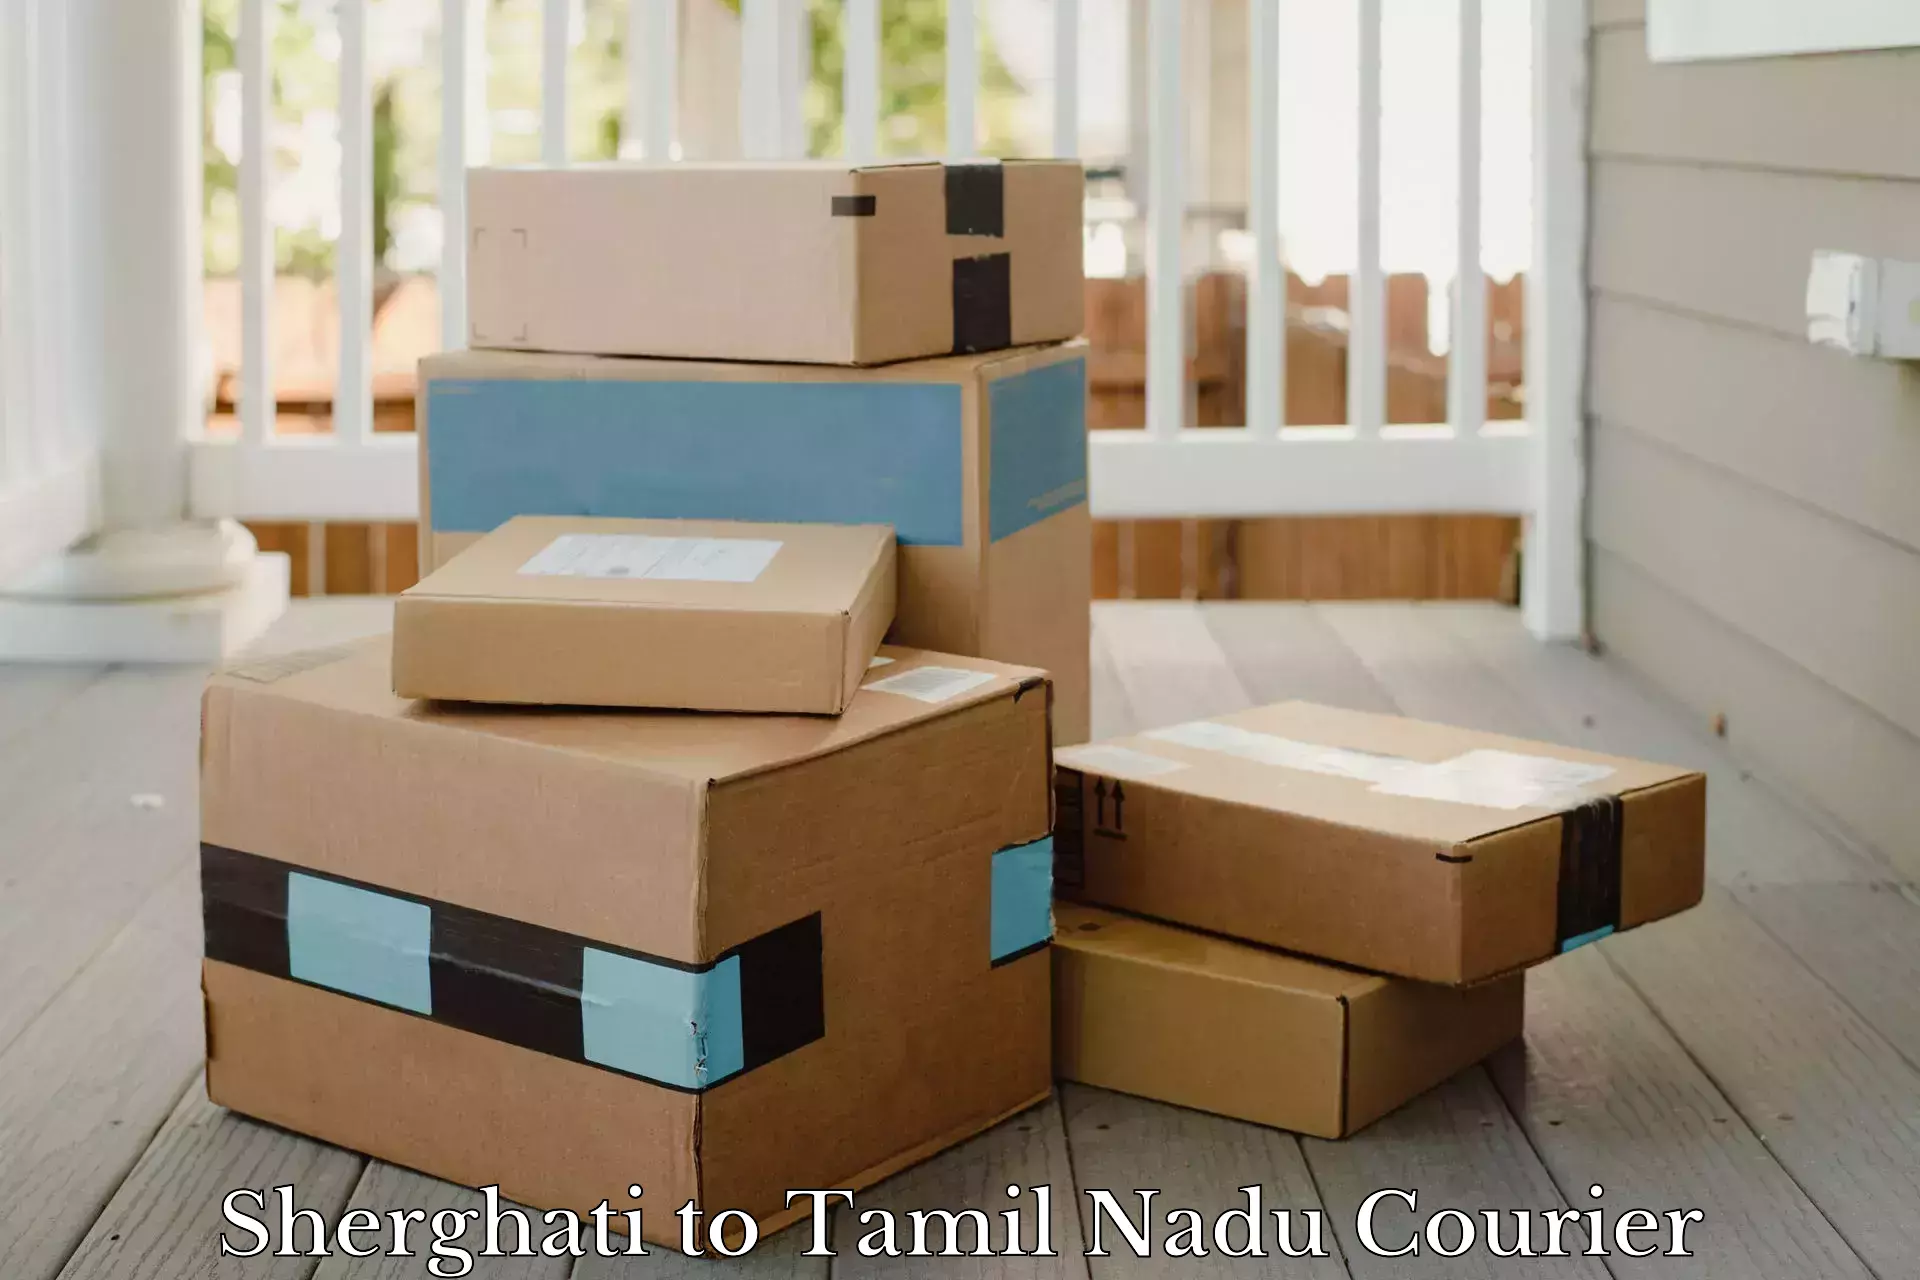 Affordable parcel rates in Sherghati to Ambattur